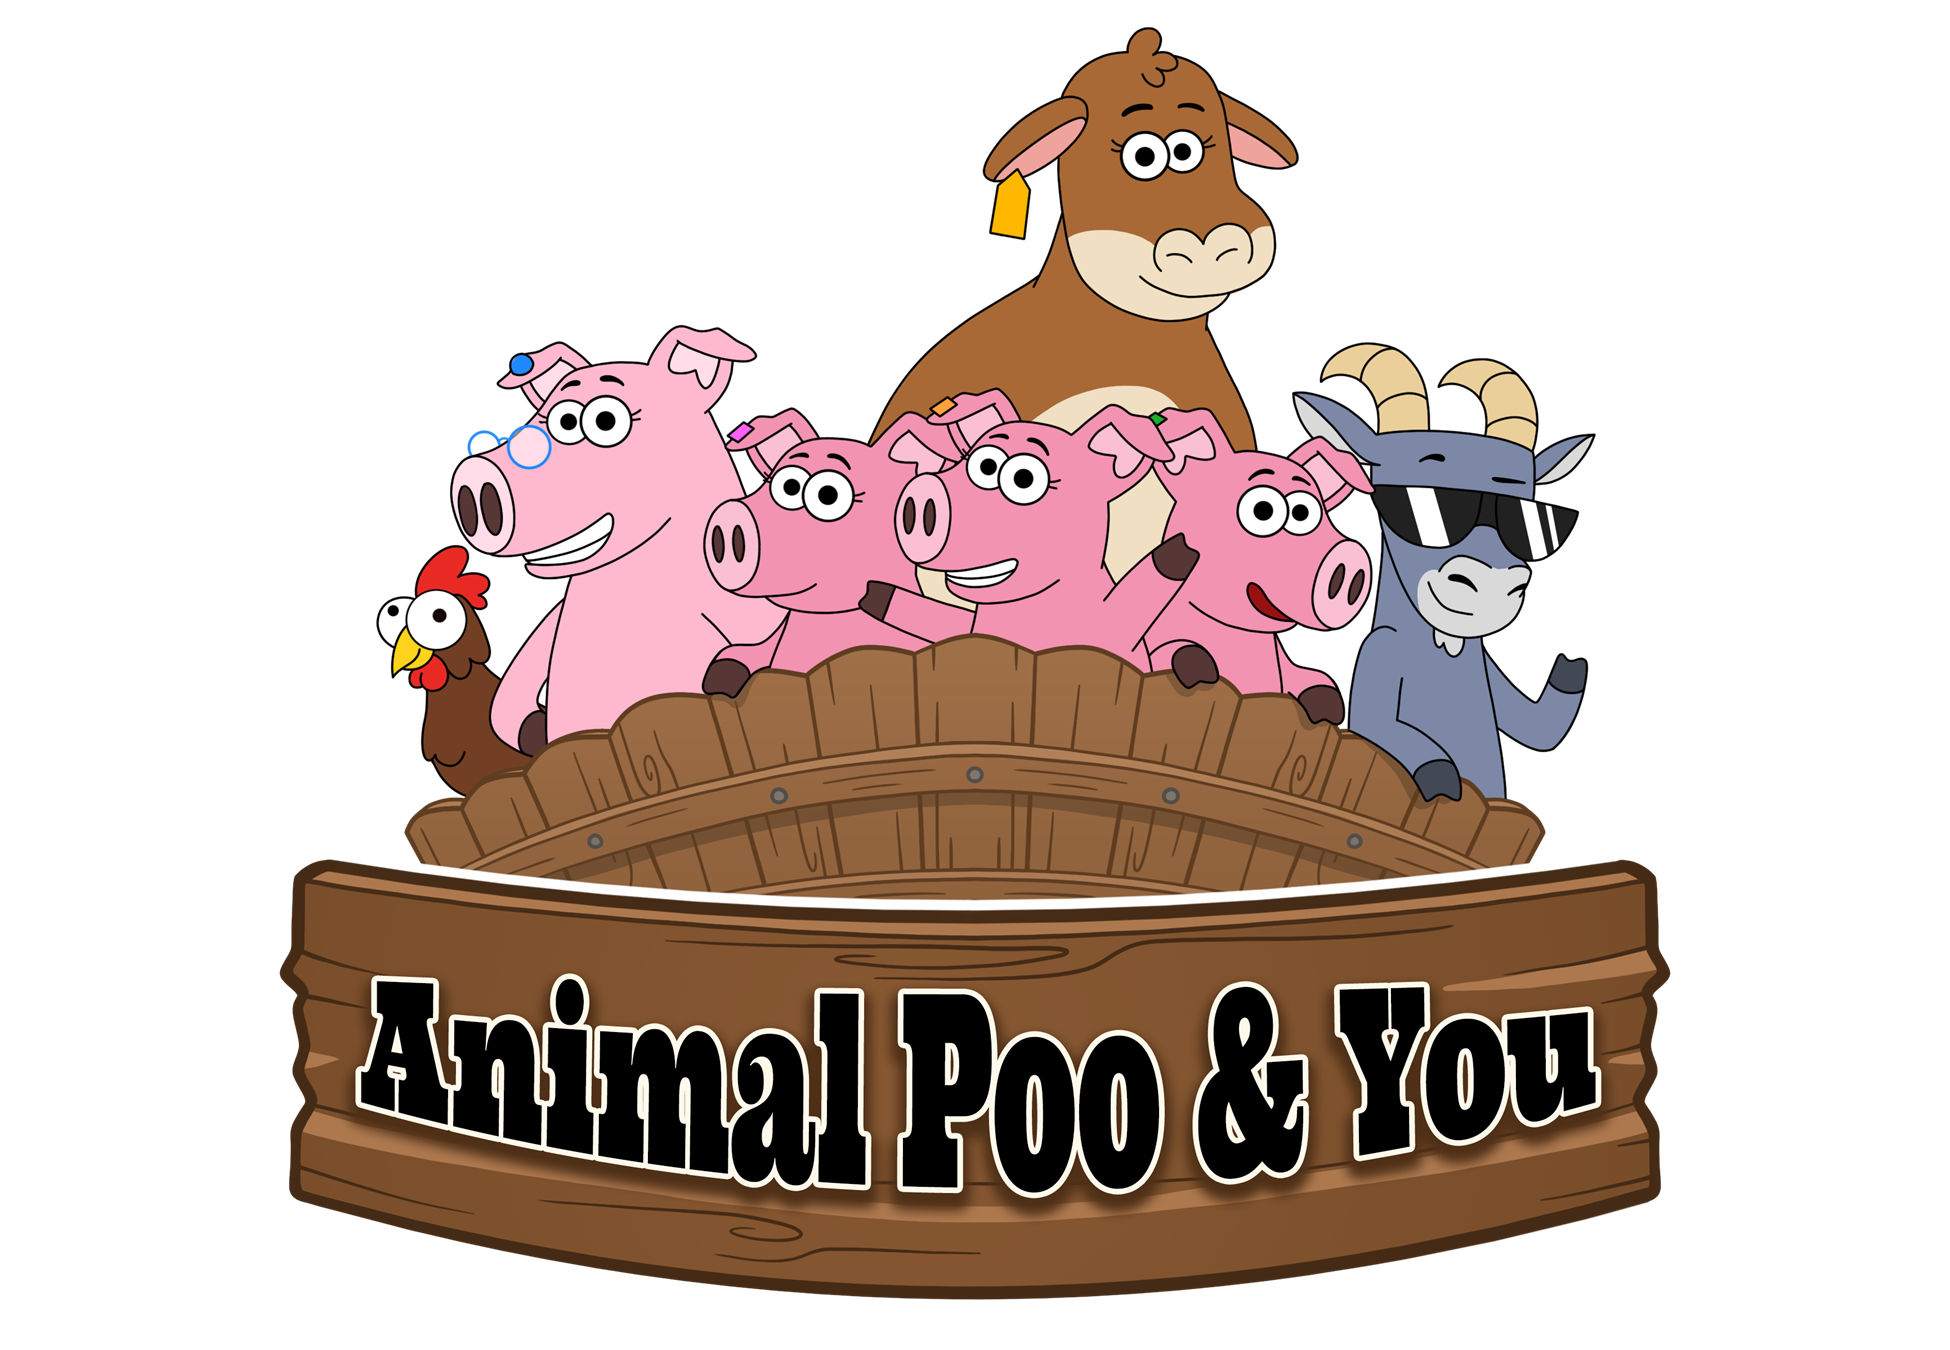 Animal Poo & You logo featuring a cow, chicken, pigs, and goat